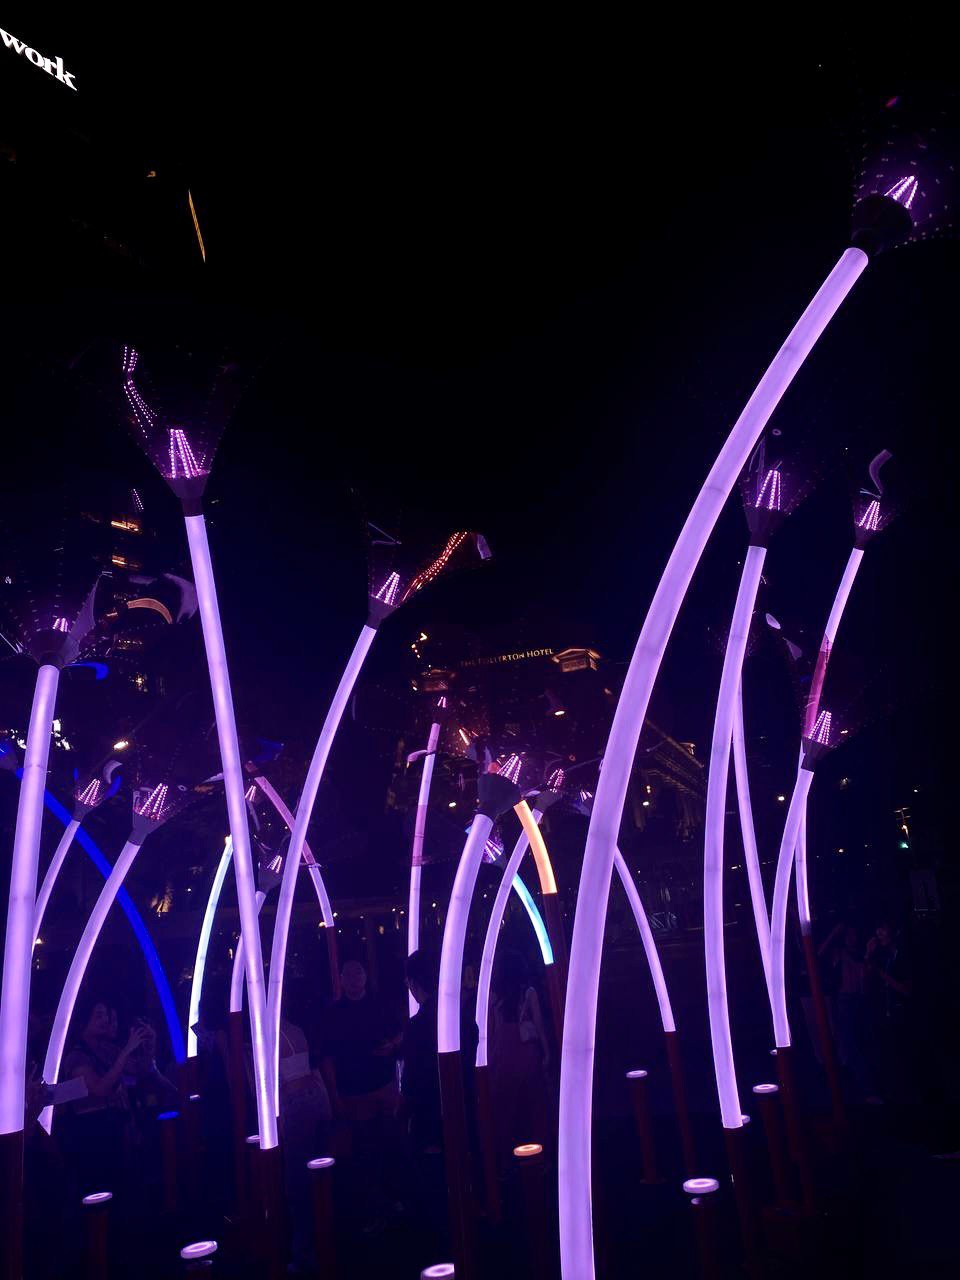 At Trumpet Flowers, festival-goers can experience creating a one-of-a-kind floral symphony as they engage with the interactive keys that control the towering musical and light instruments.